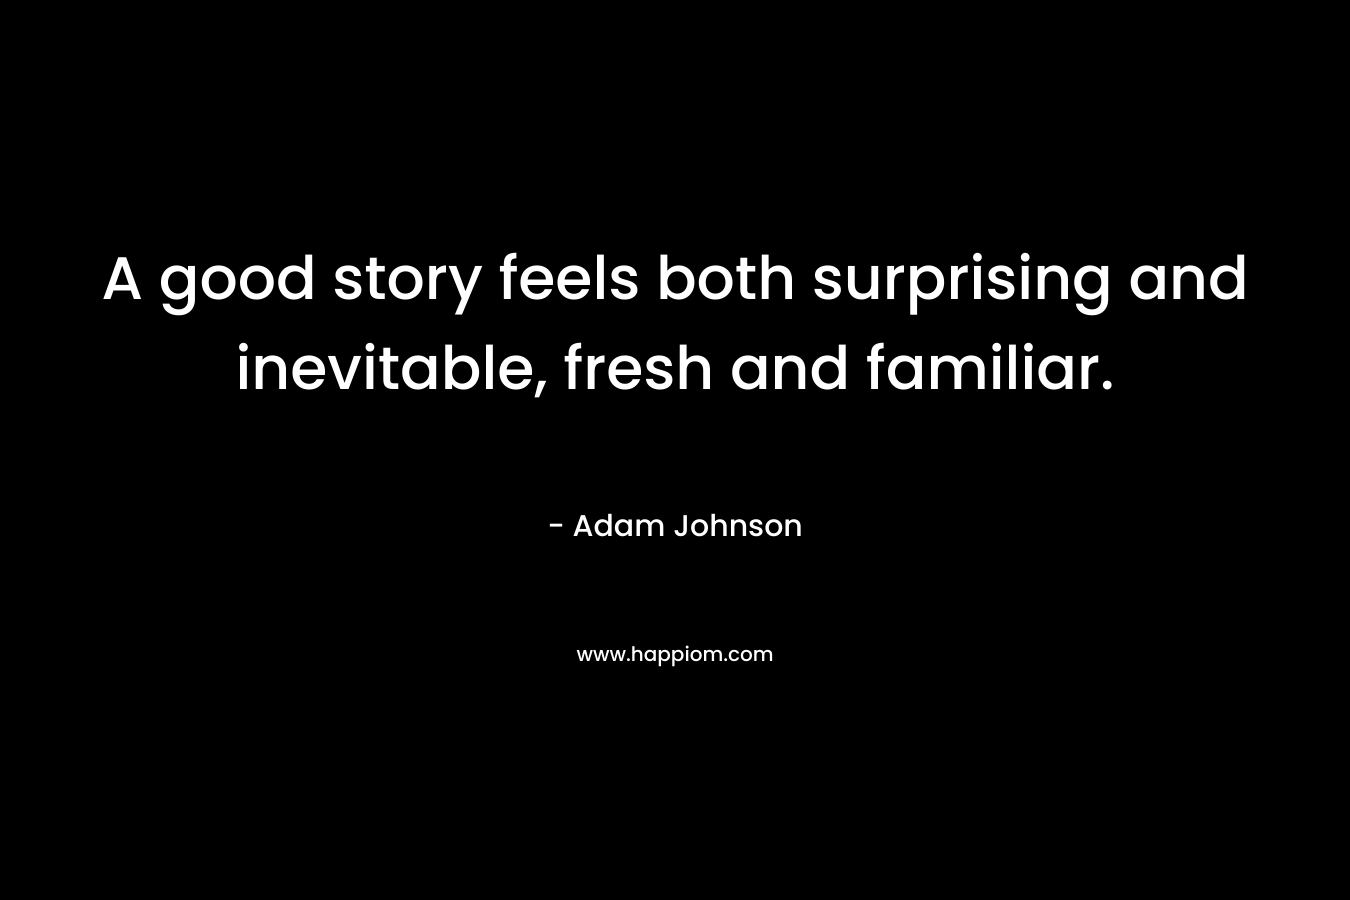 A good story feels both surprising and inevitable, fresh and familiar.